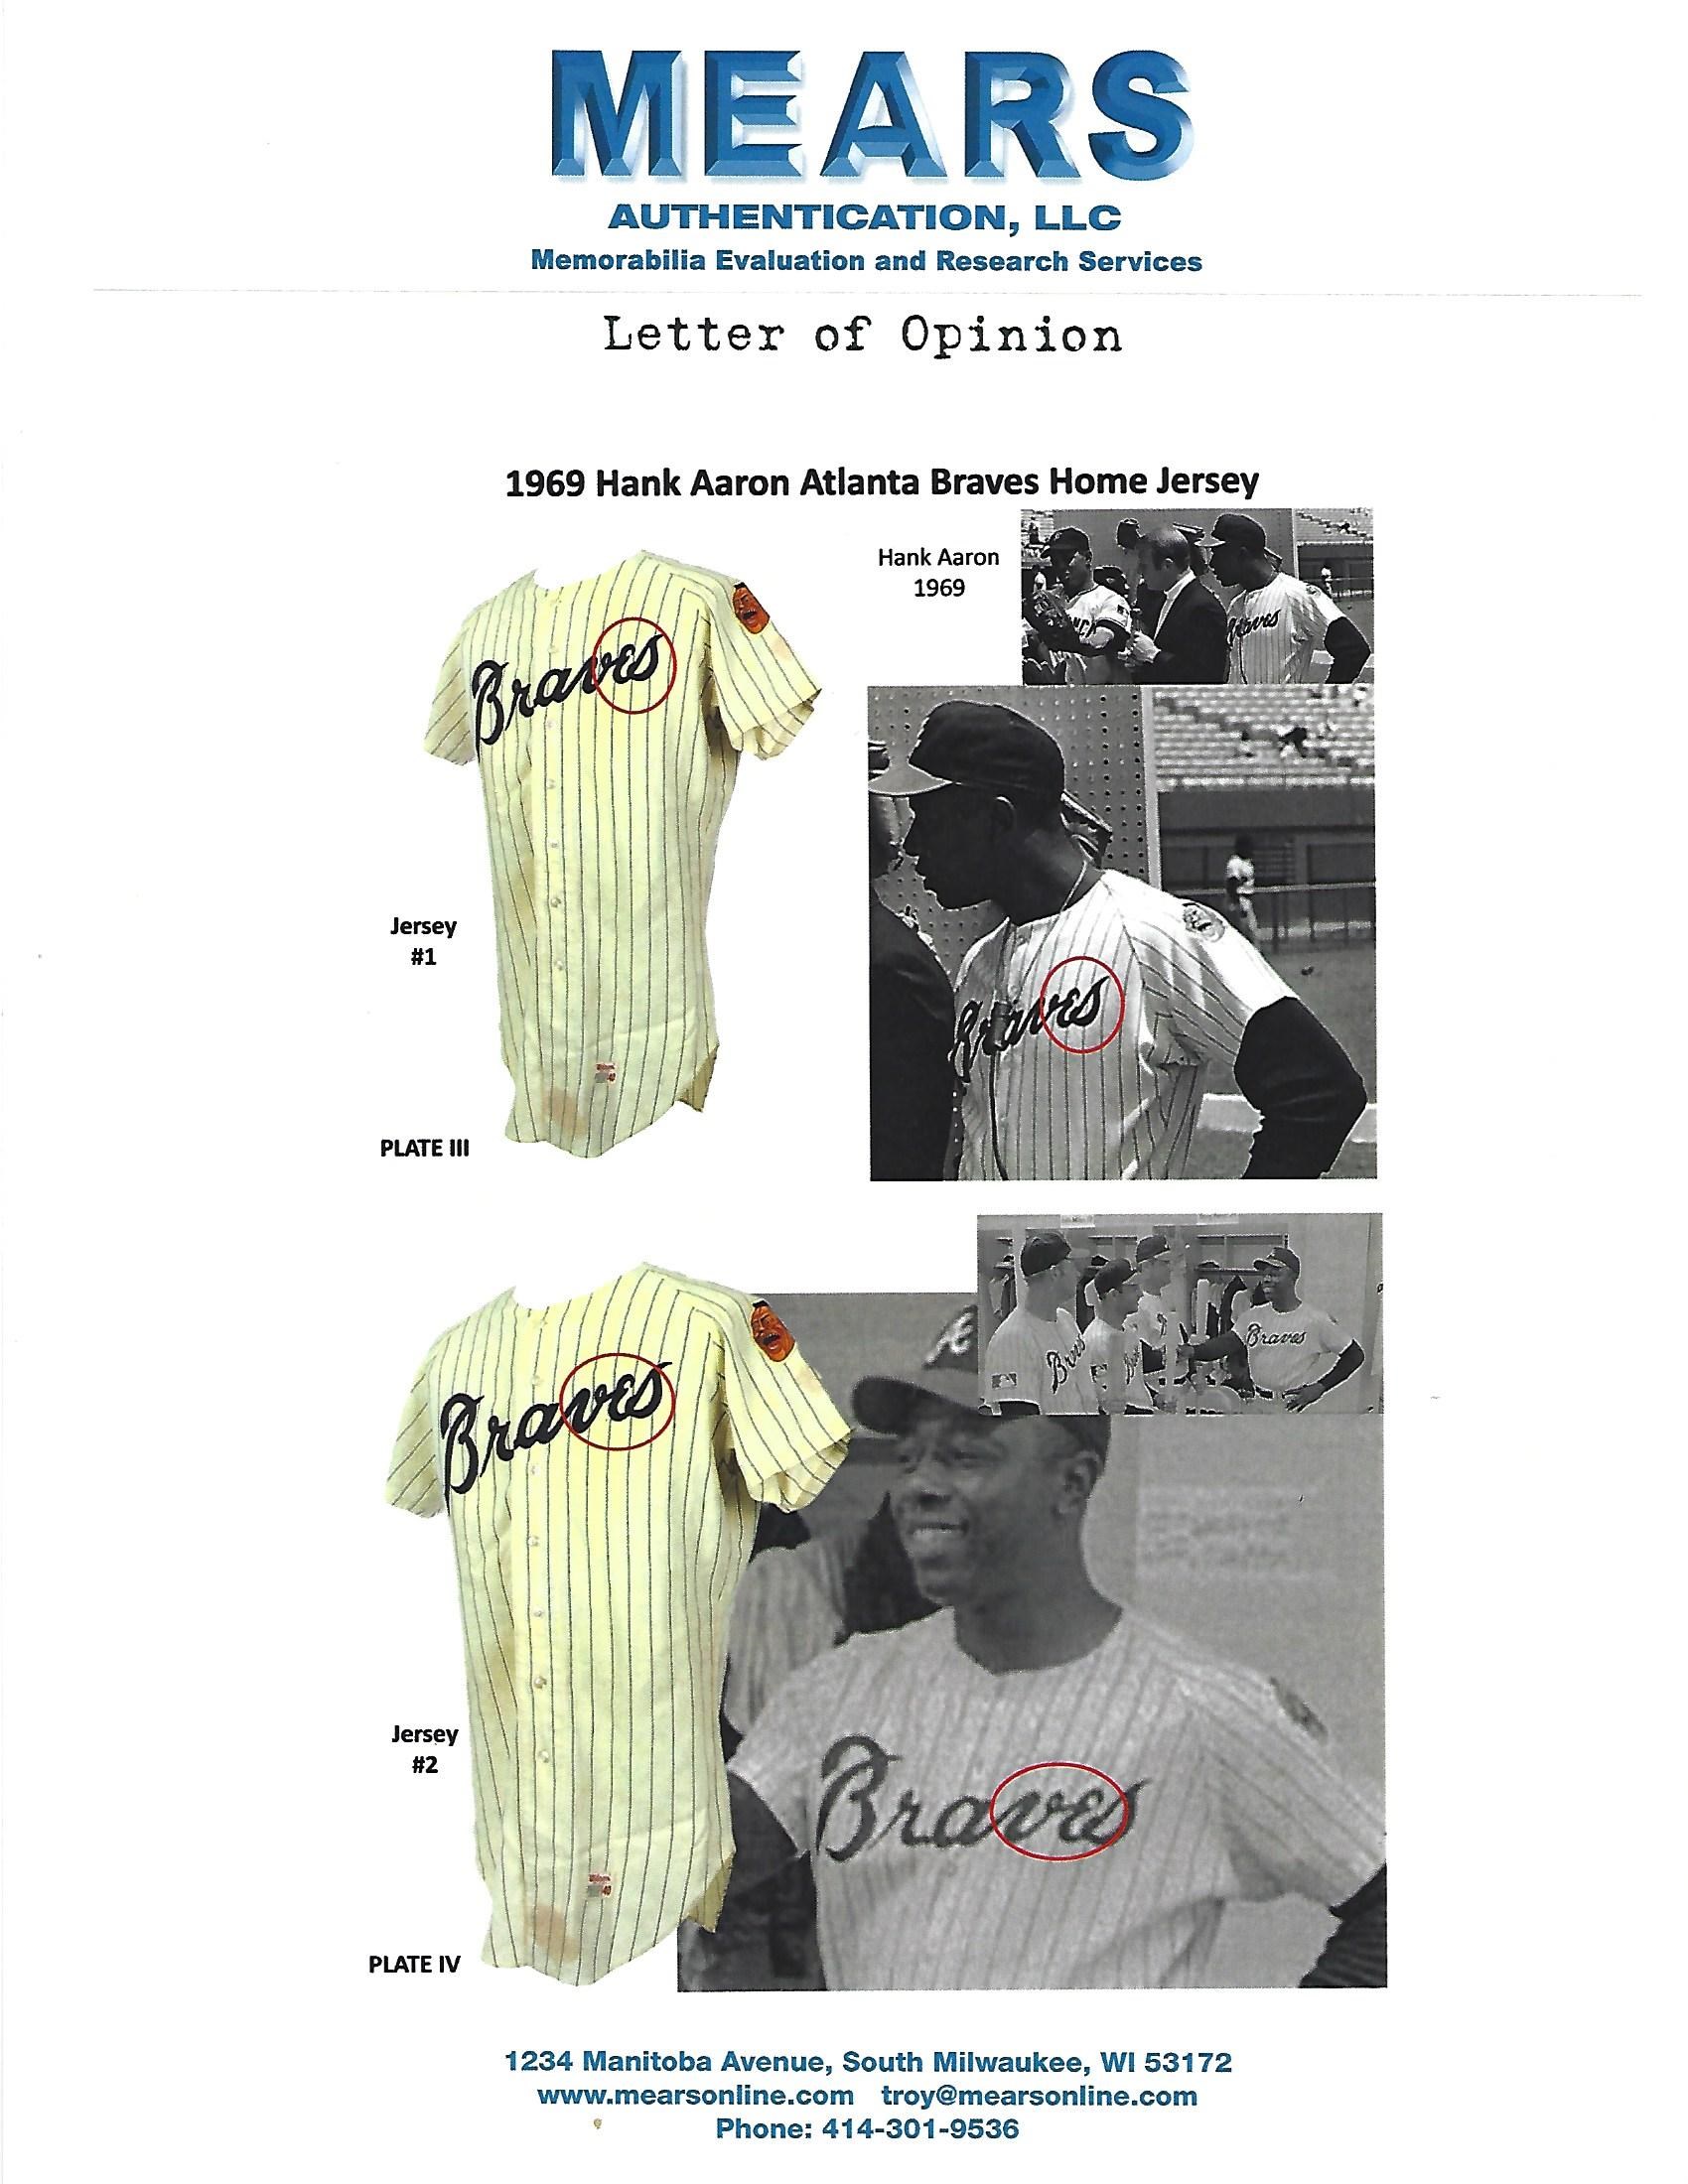 Lot Detail - Hank Aaron 6/21/1969 Atlanta Braves Game Used Home Jersey -  Iconic Aaron/Mantle/Mays Photo Match! A+ Original Condition (MEARS A10,  Meigray,RGU)